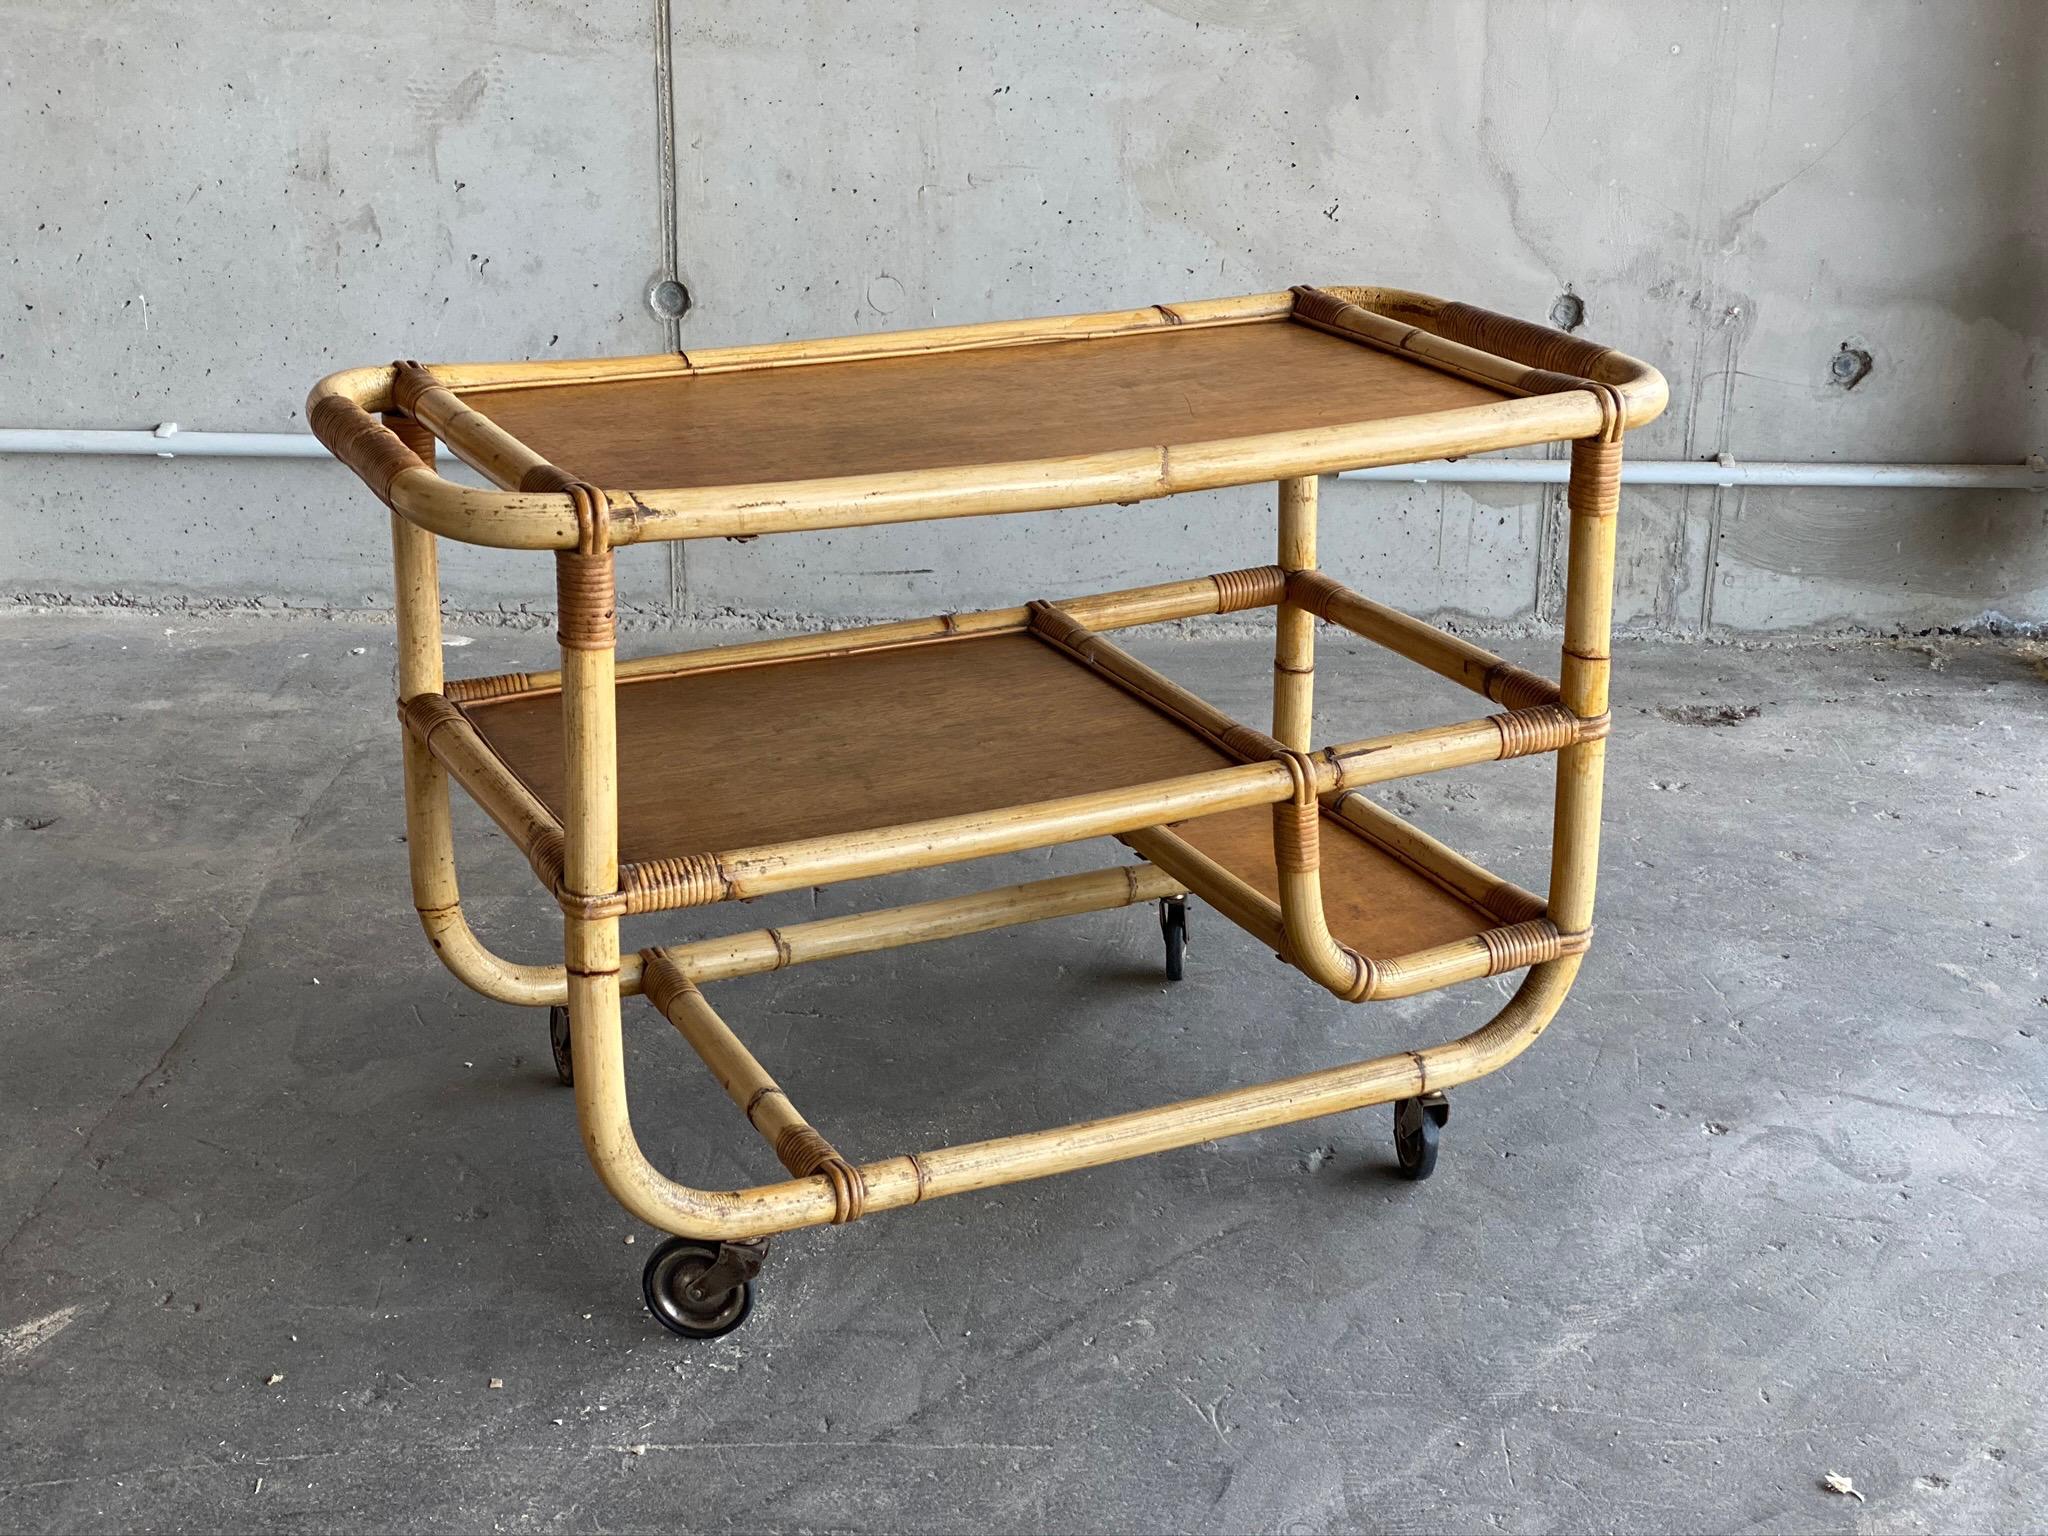 A charming serving trolley from the 1940s. The trolley comes on wheels and is made of bamboo and rattan. Its geometric, linear design is reminiscent of Art Deco furniture design from the 1920s, while the choice of materials is typical of the 1950s.